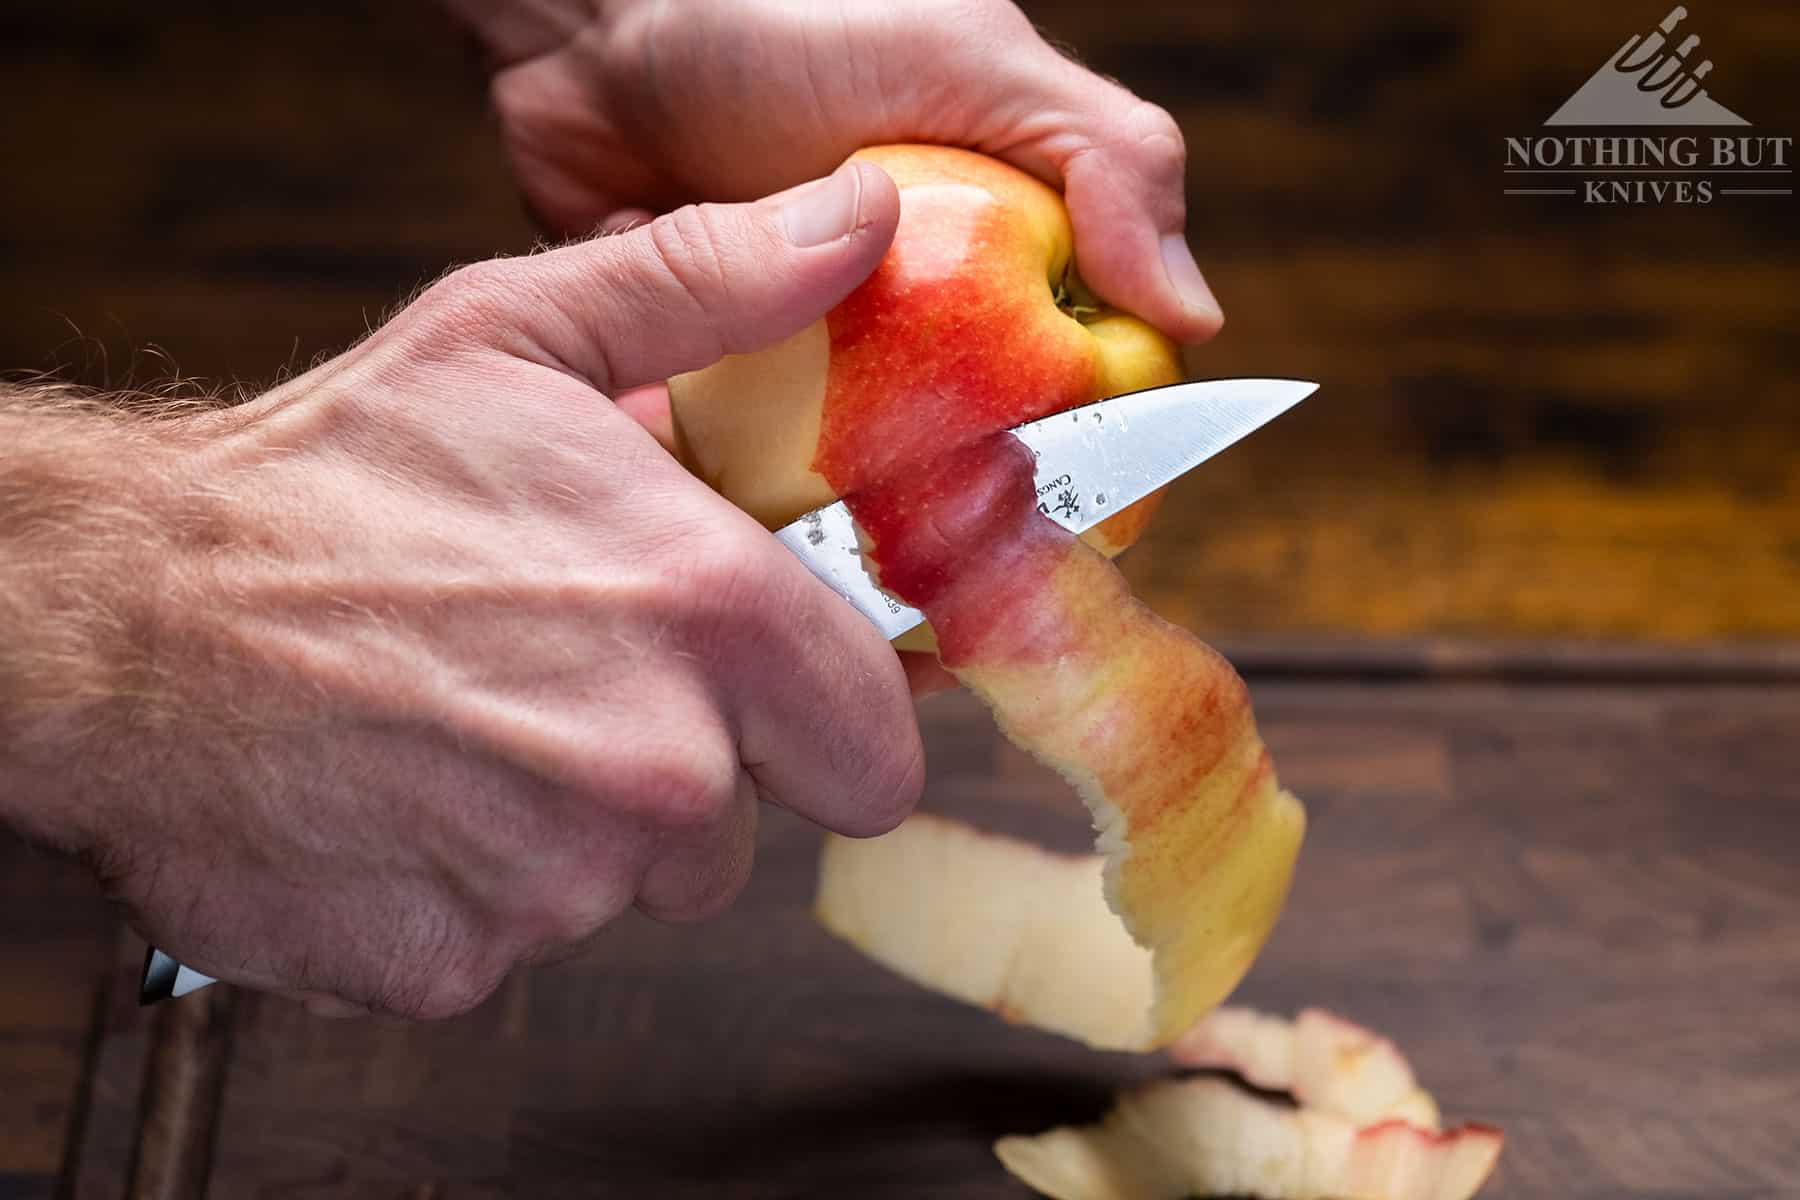 Peeling an apple with the Cangshan Helena paring knife was a lot of fun.